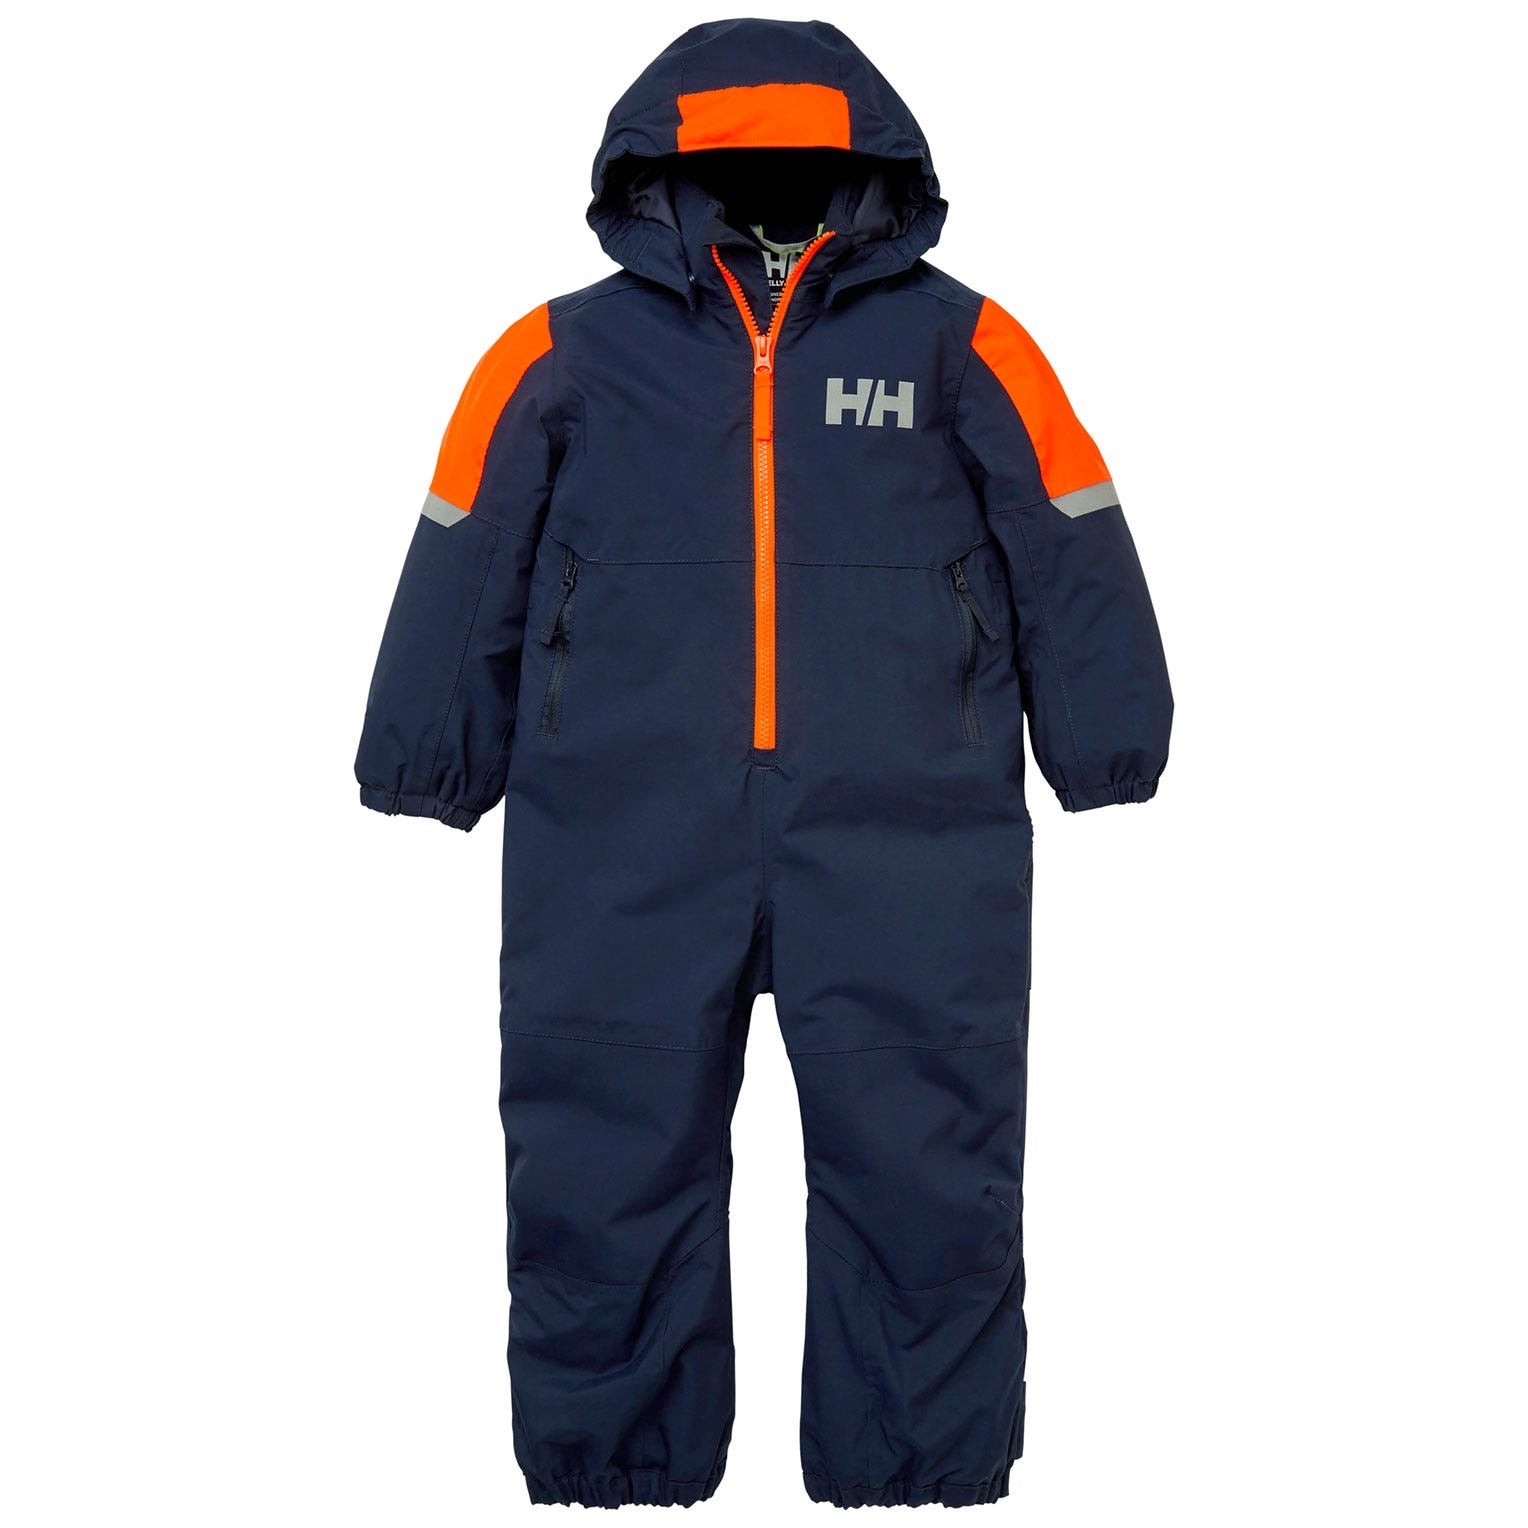 Kids Rider 2.0 Insulated Suit